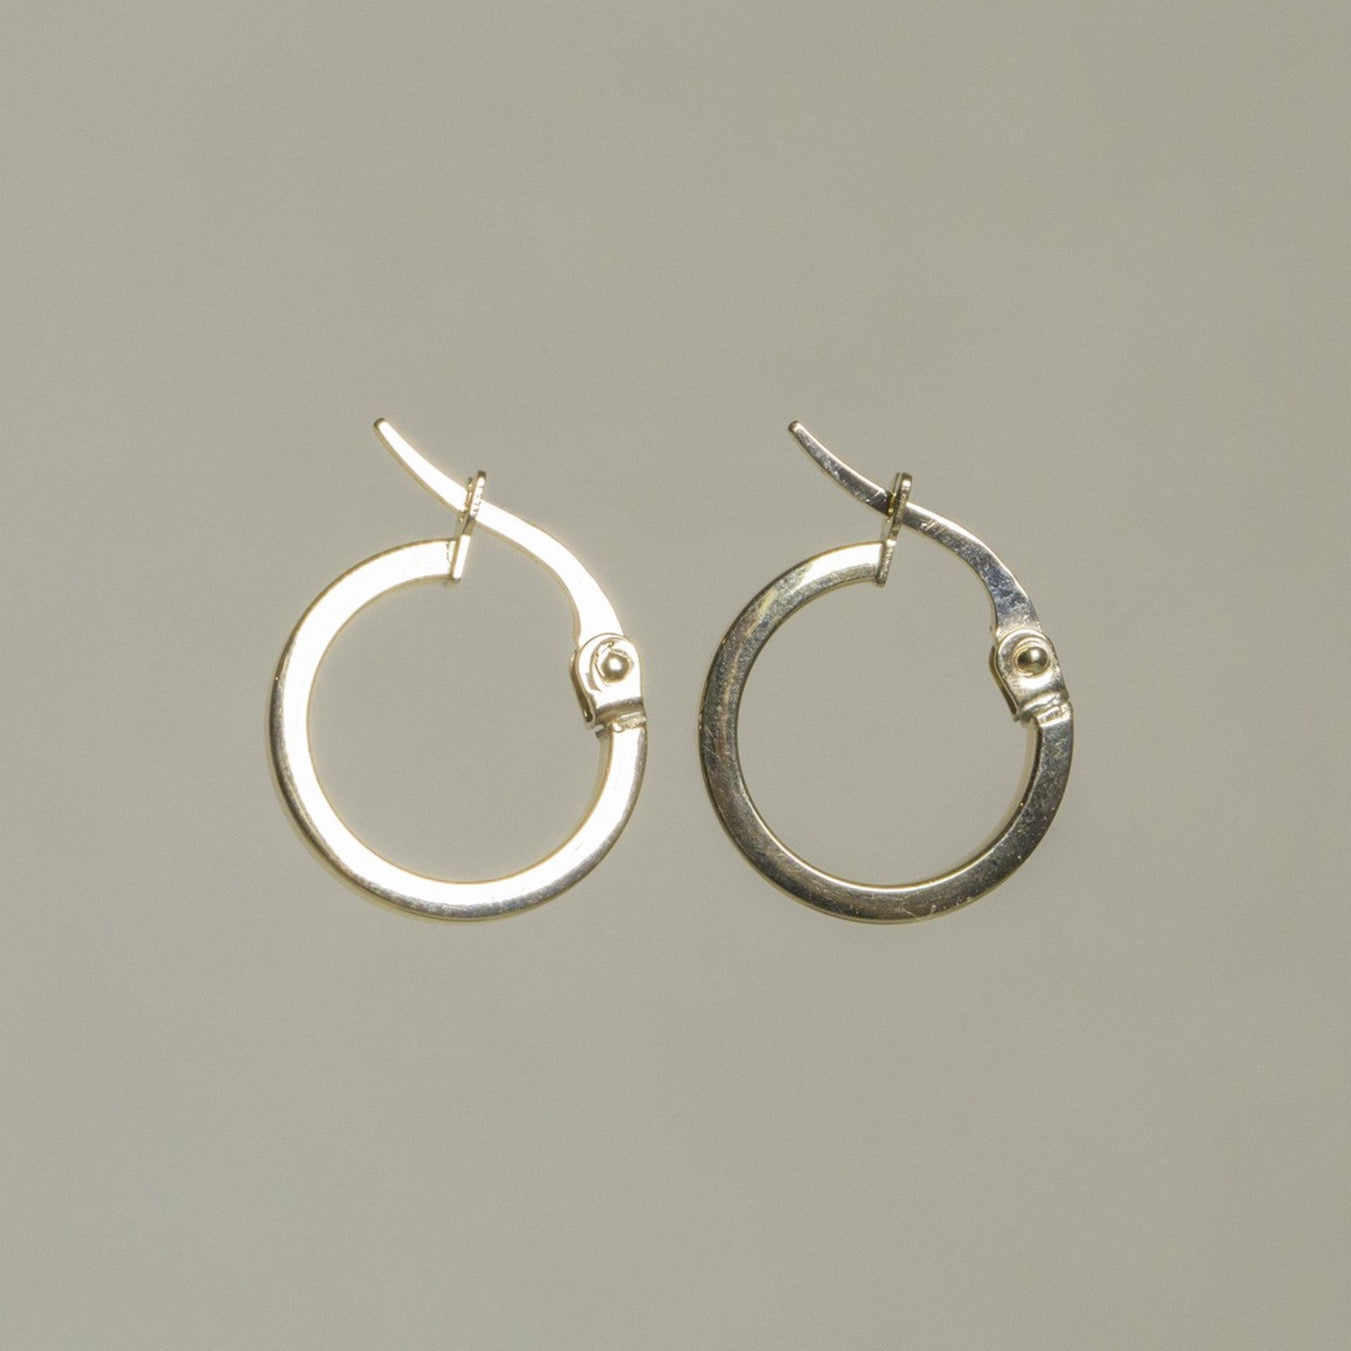 adorable, modern looking large everyday gold hoops